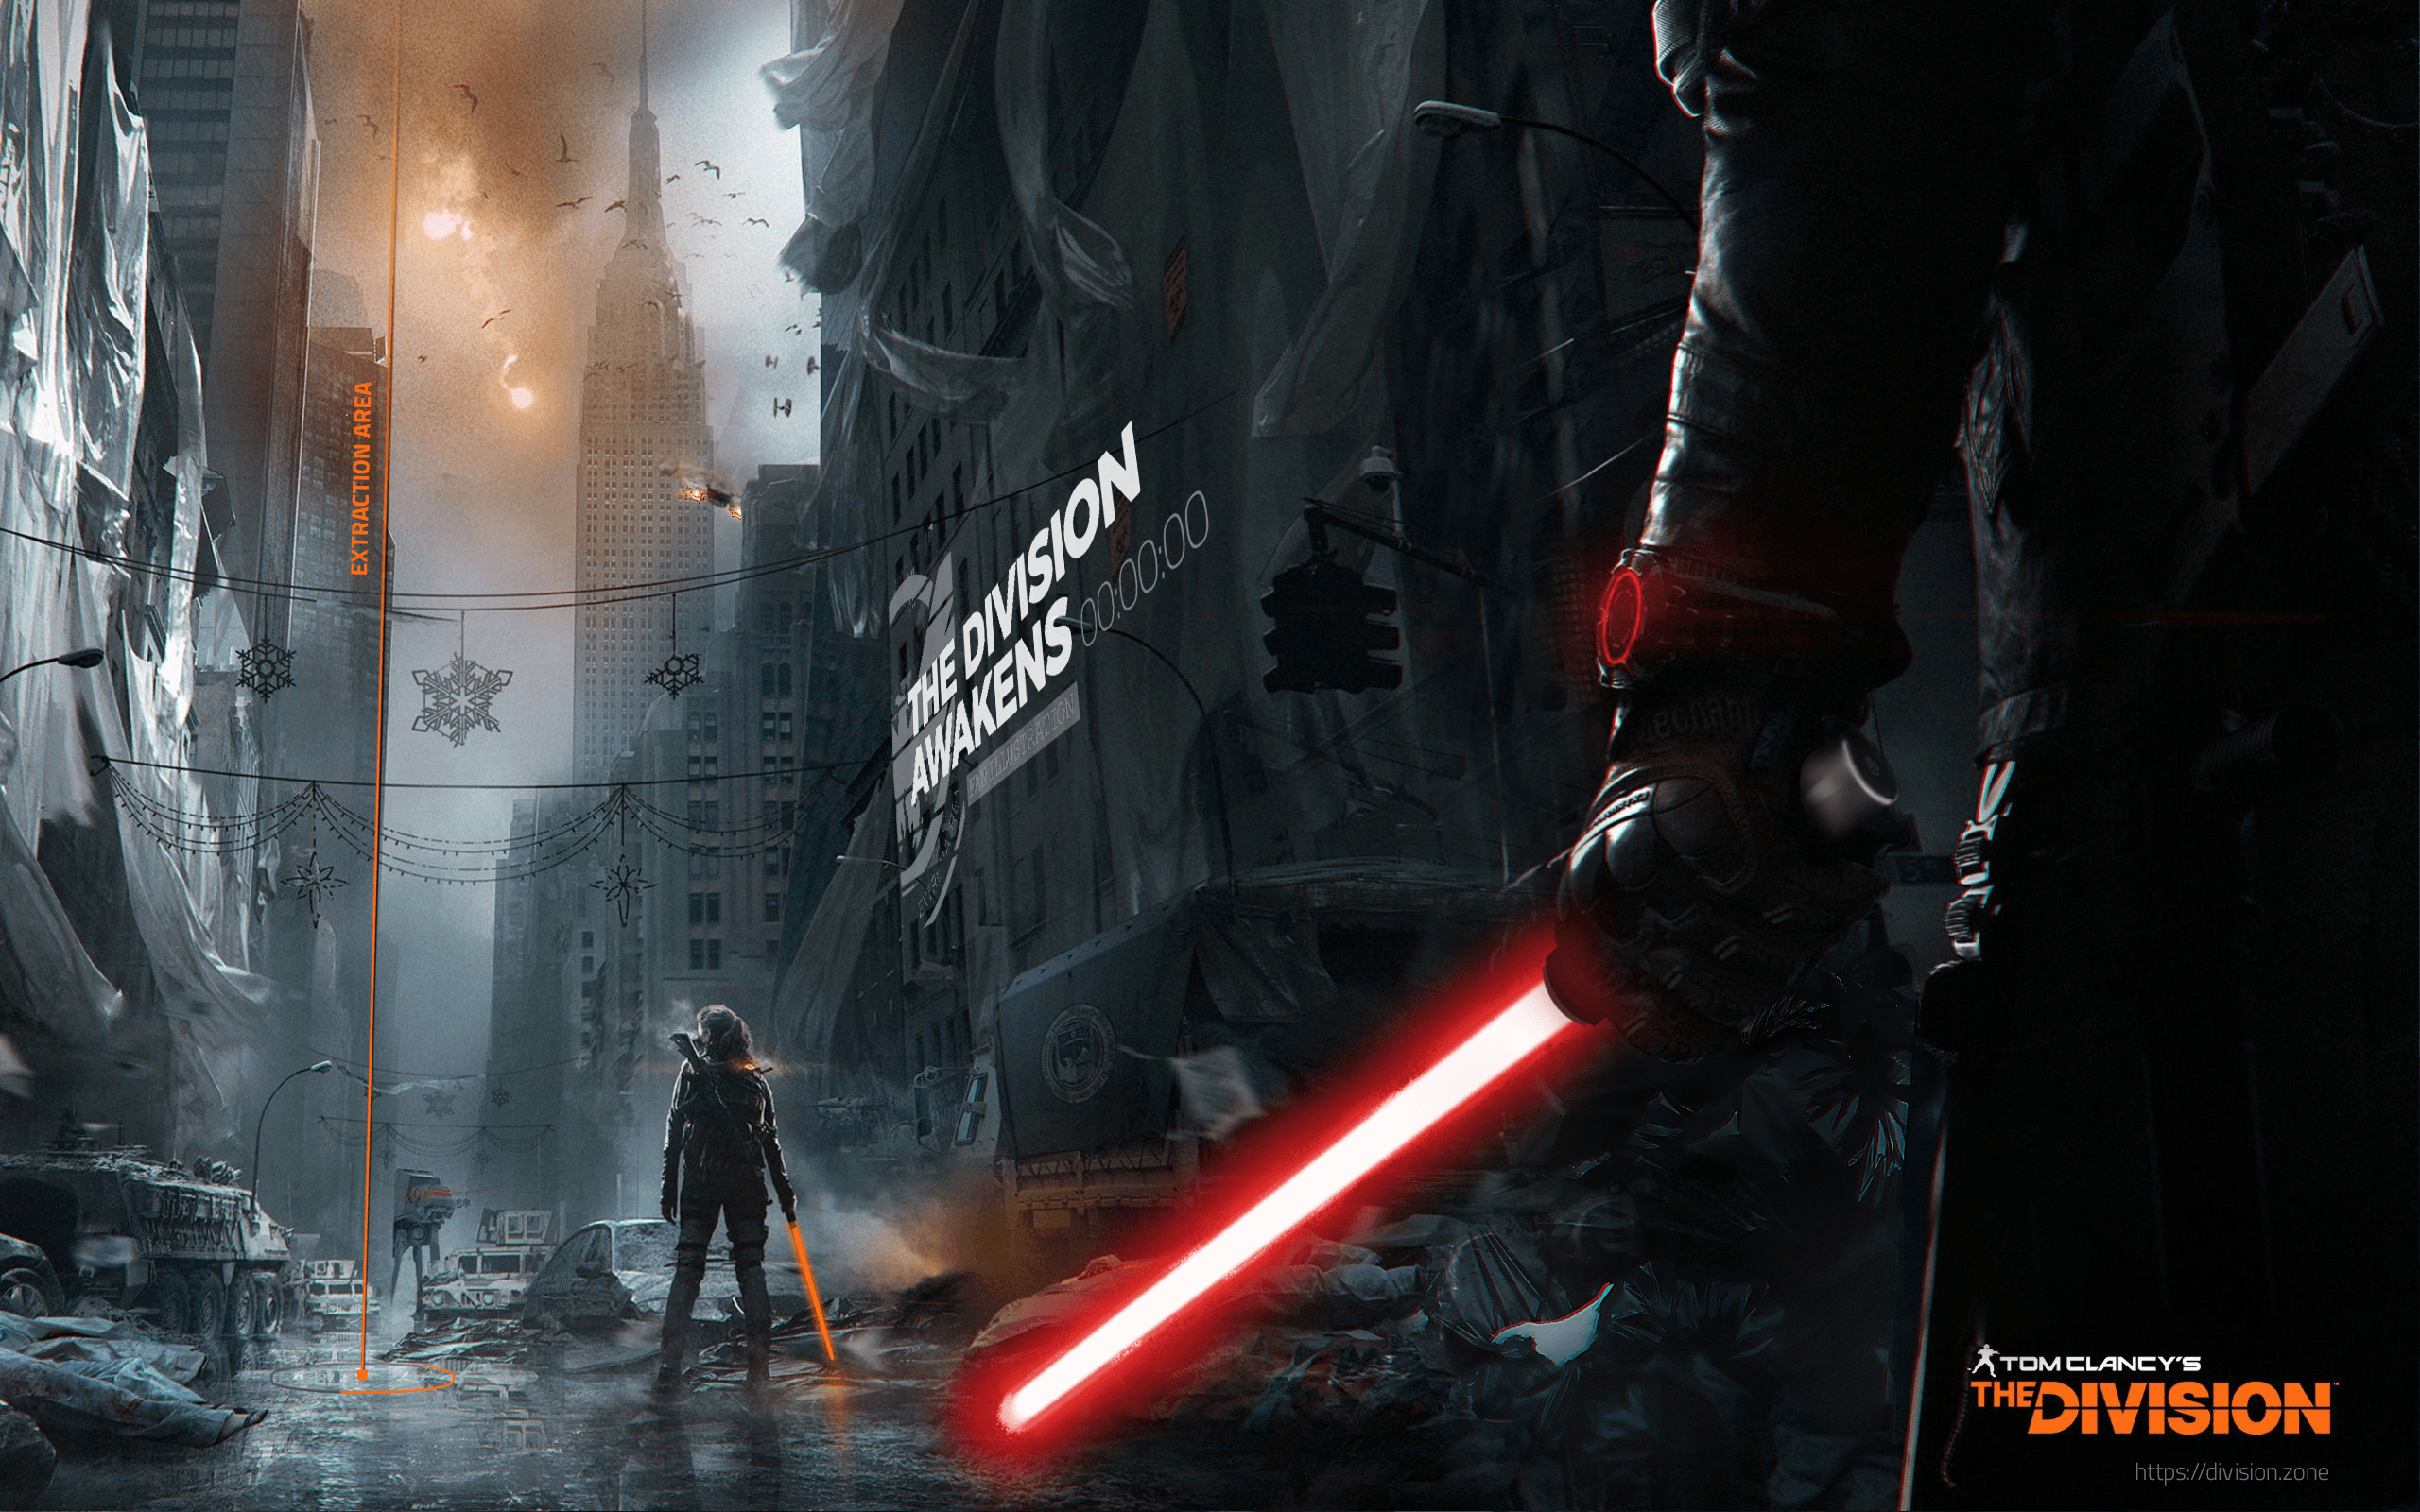 The Division Awakens Wallpaper: December 2015 / The Division Zone